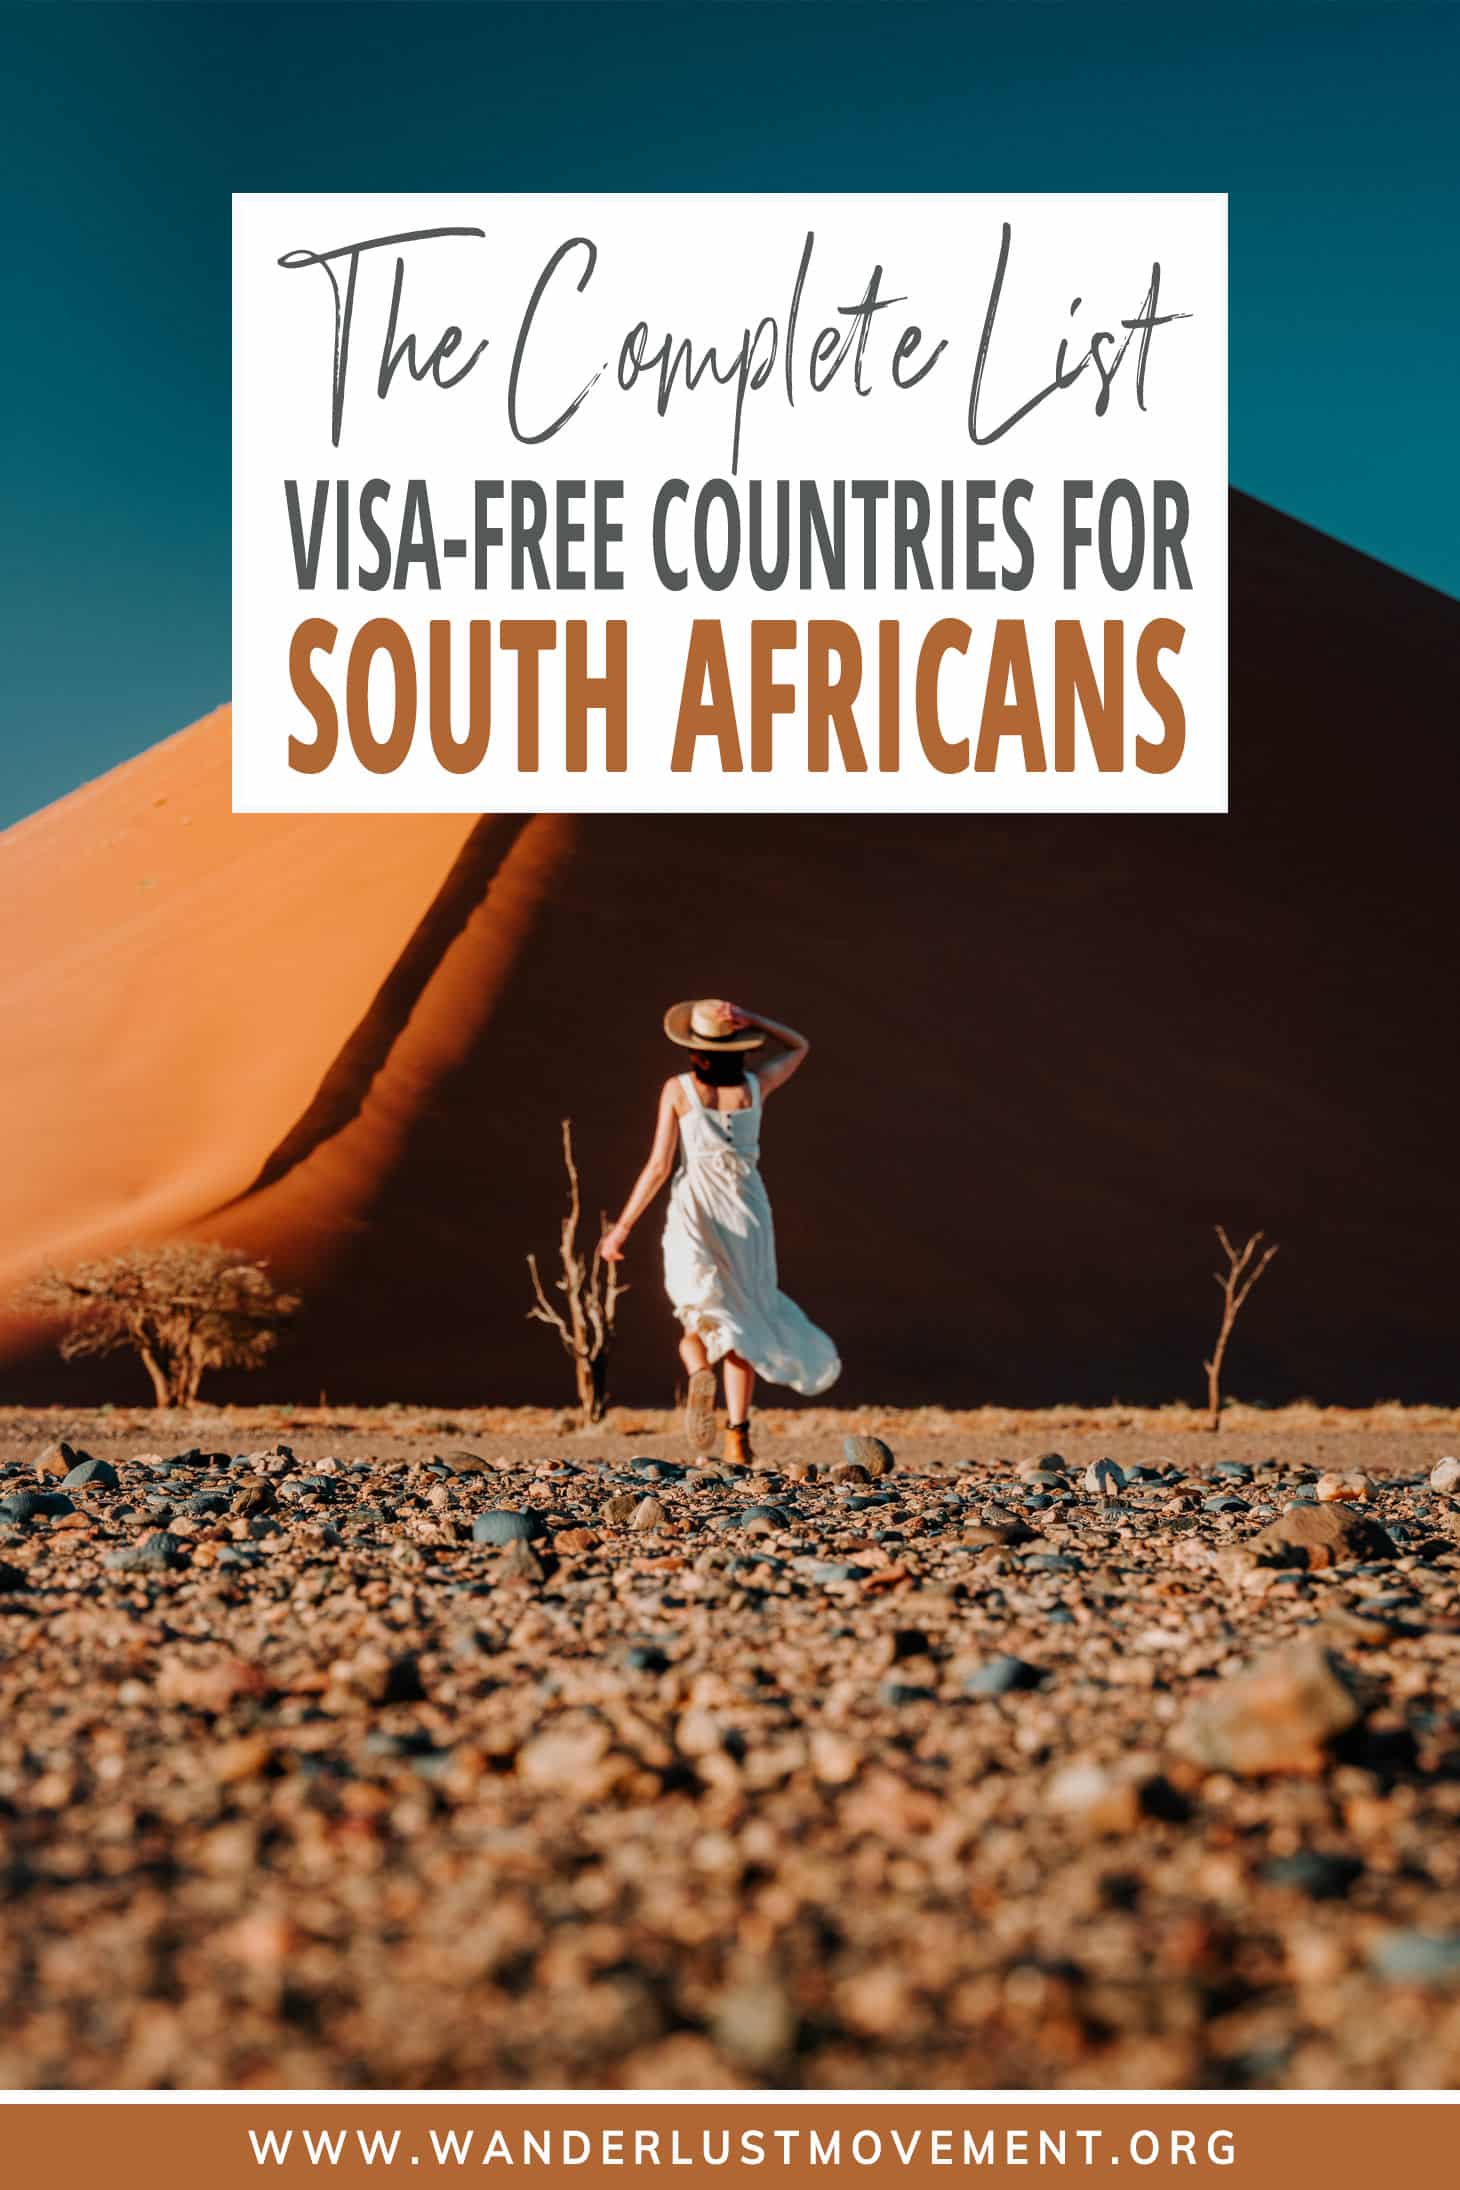 The Complete List of Visa-Free Countries for South Africans